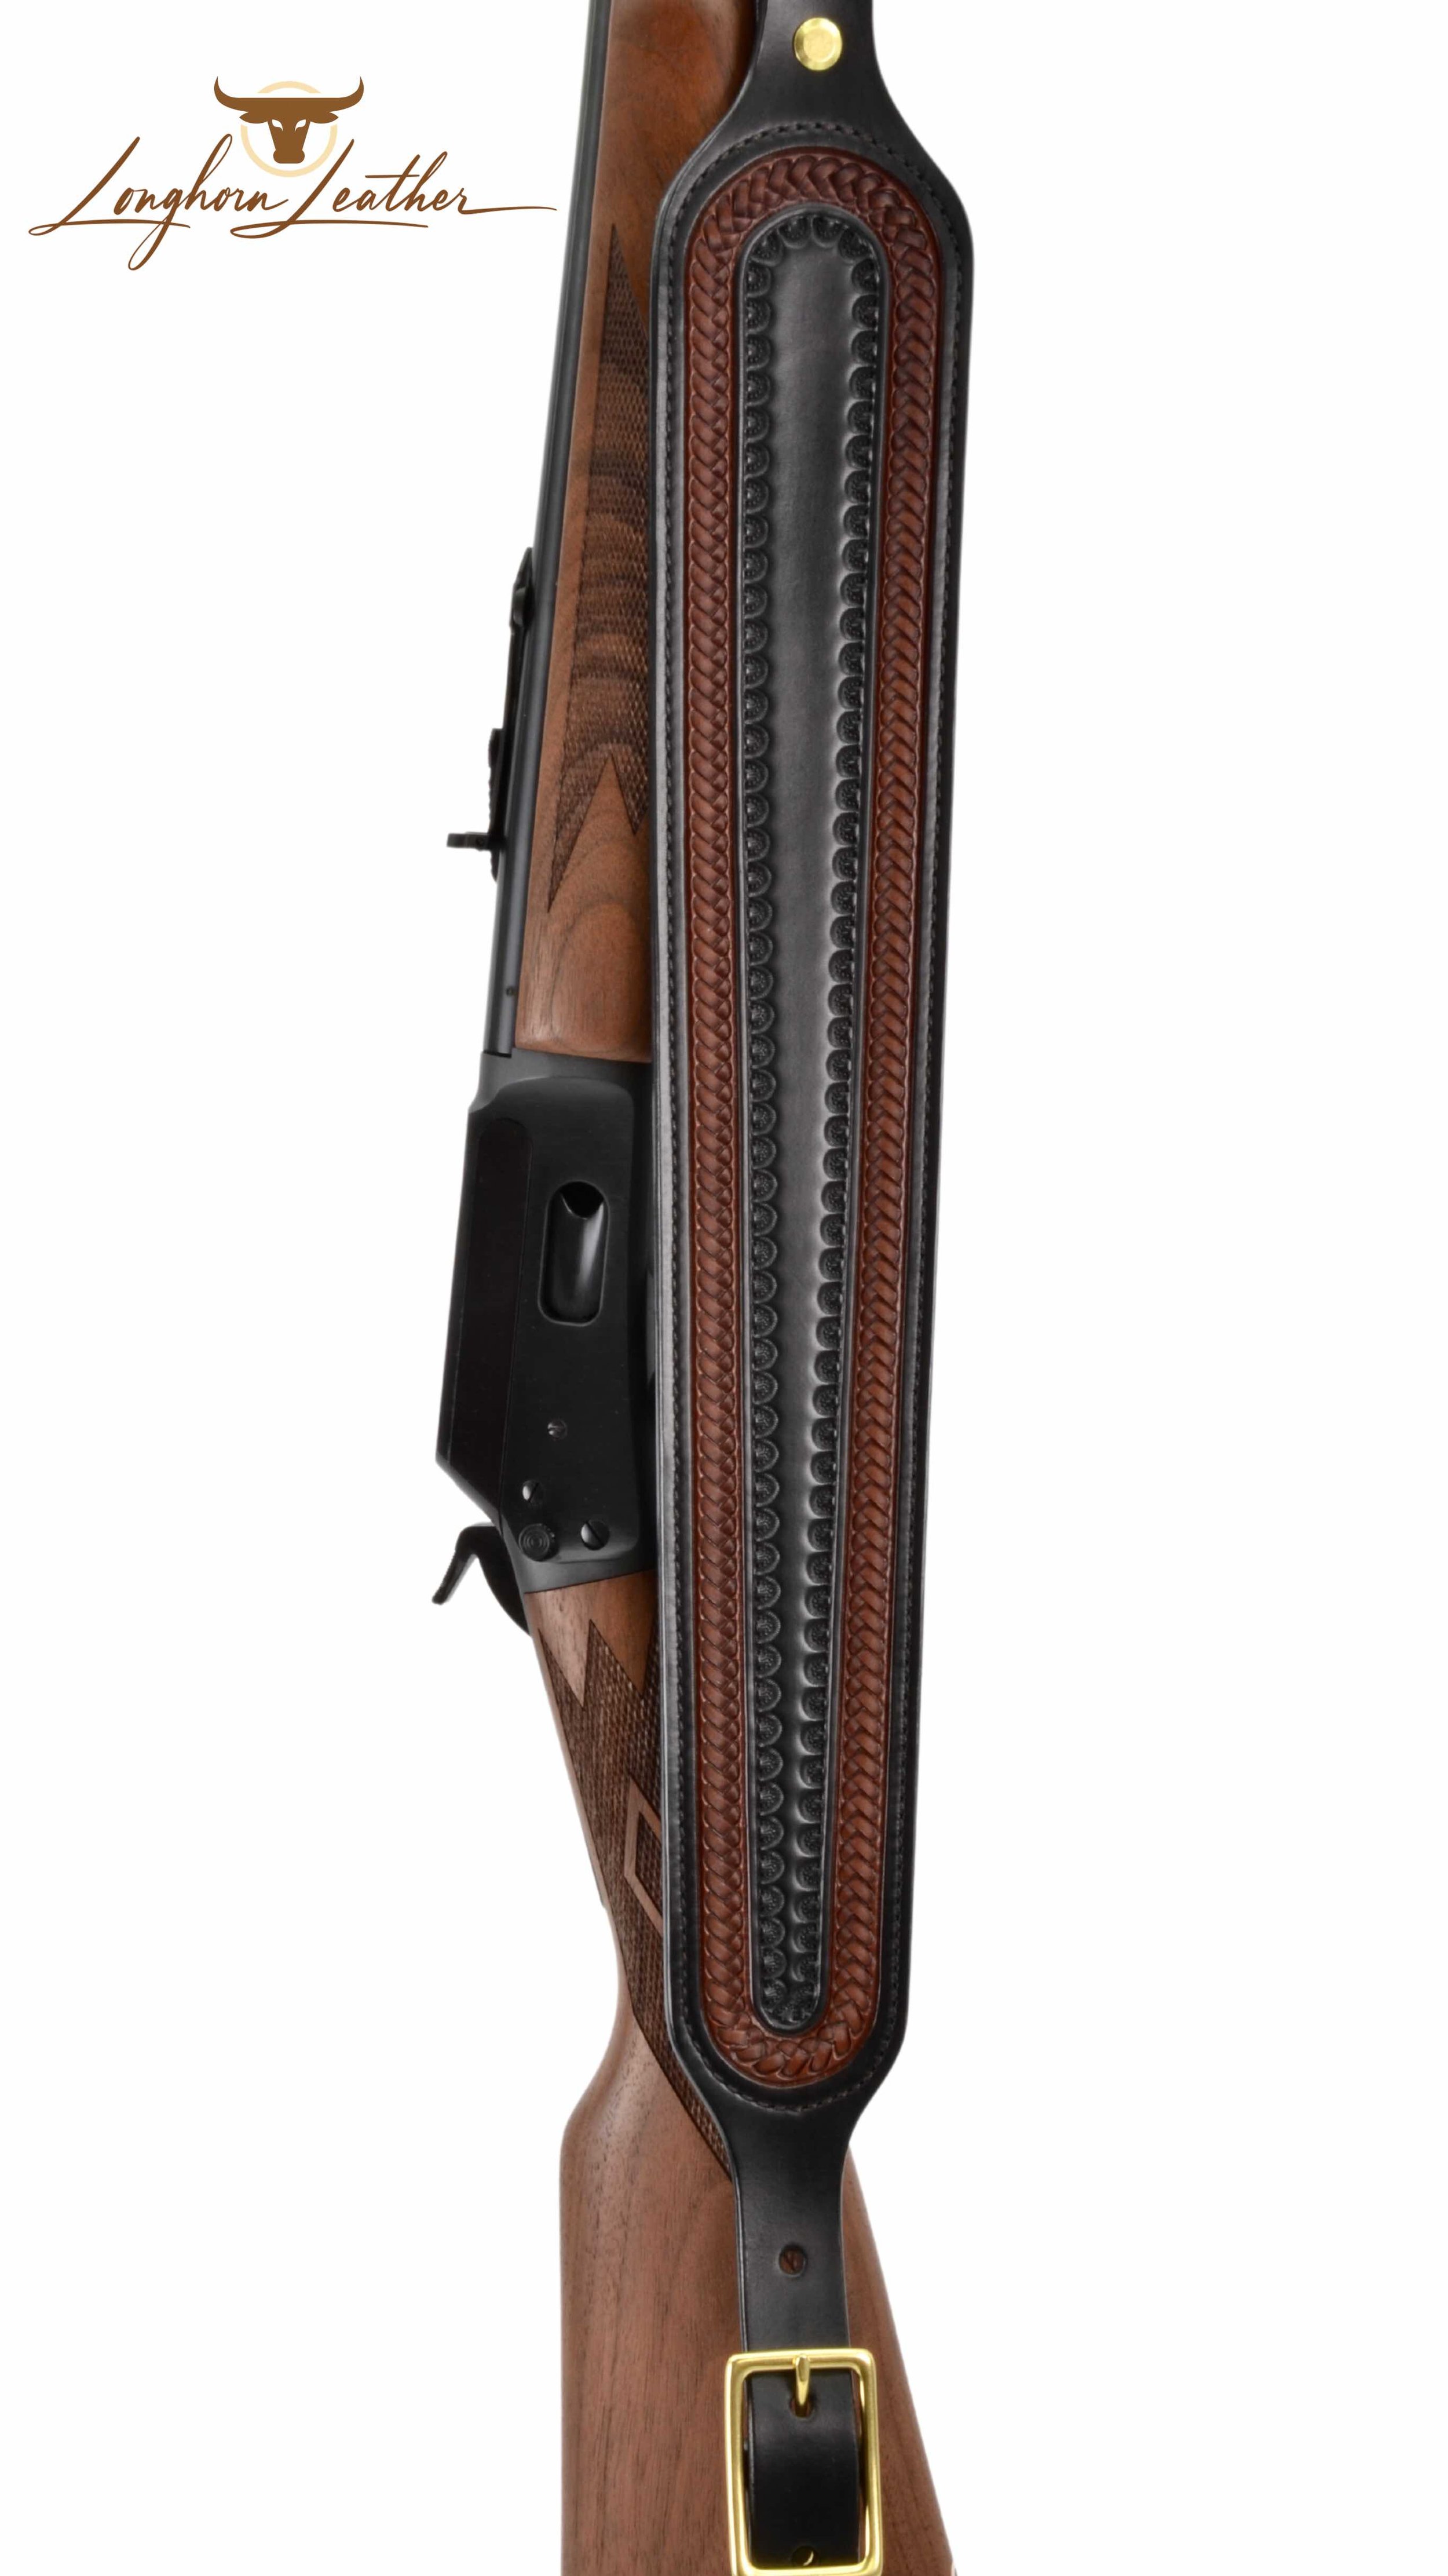 Custom leather rifle sling featuring the Sedona design.  Individually handcrafted at Longhorn Leather AZ.jpg